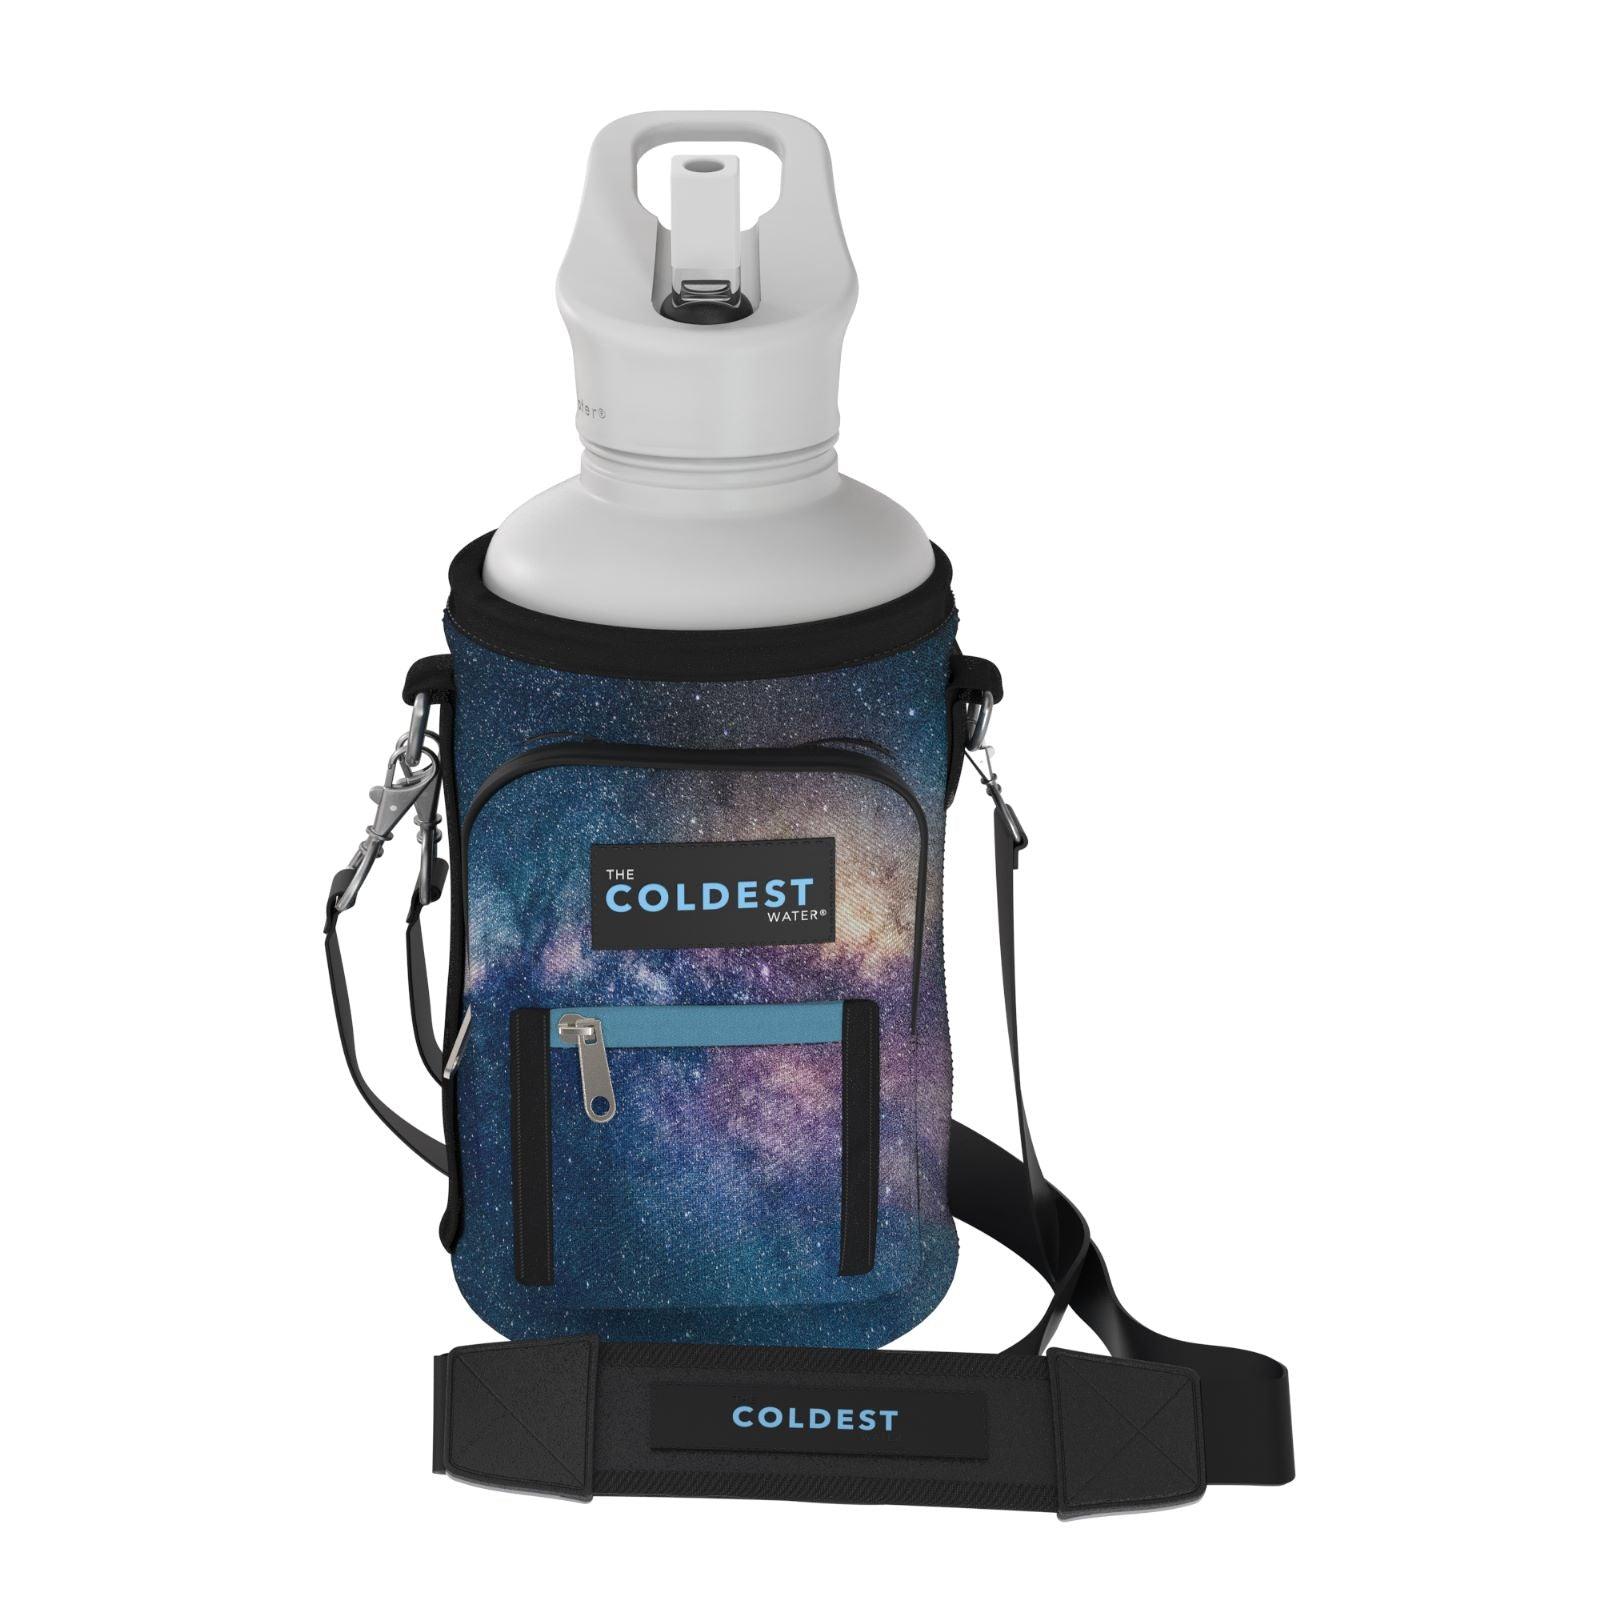 The Coldest Bottle Sleeve & Carrier - The Coldest Water